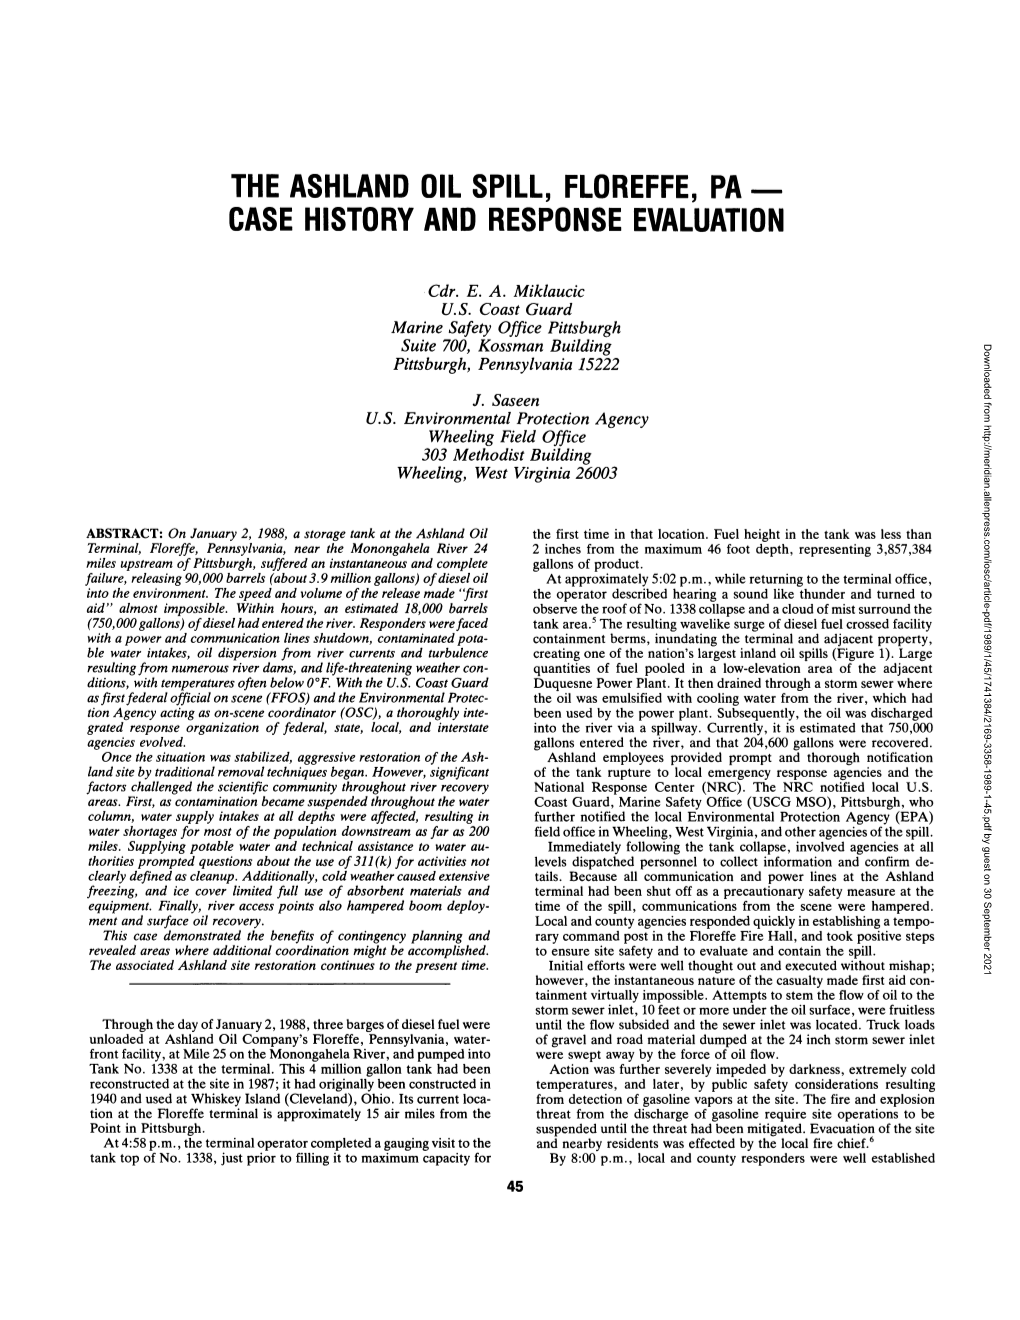 The Ashland Oil Spill, Floreffe, Pa — Case History and Response Evaluation